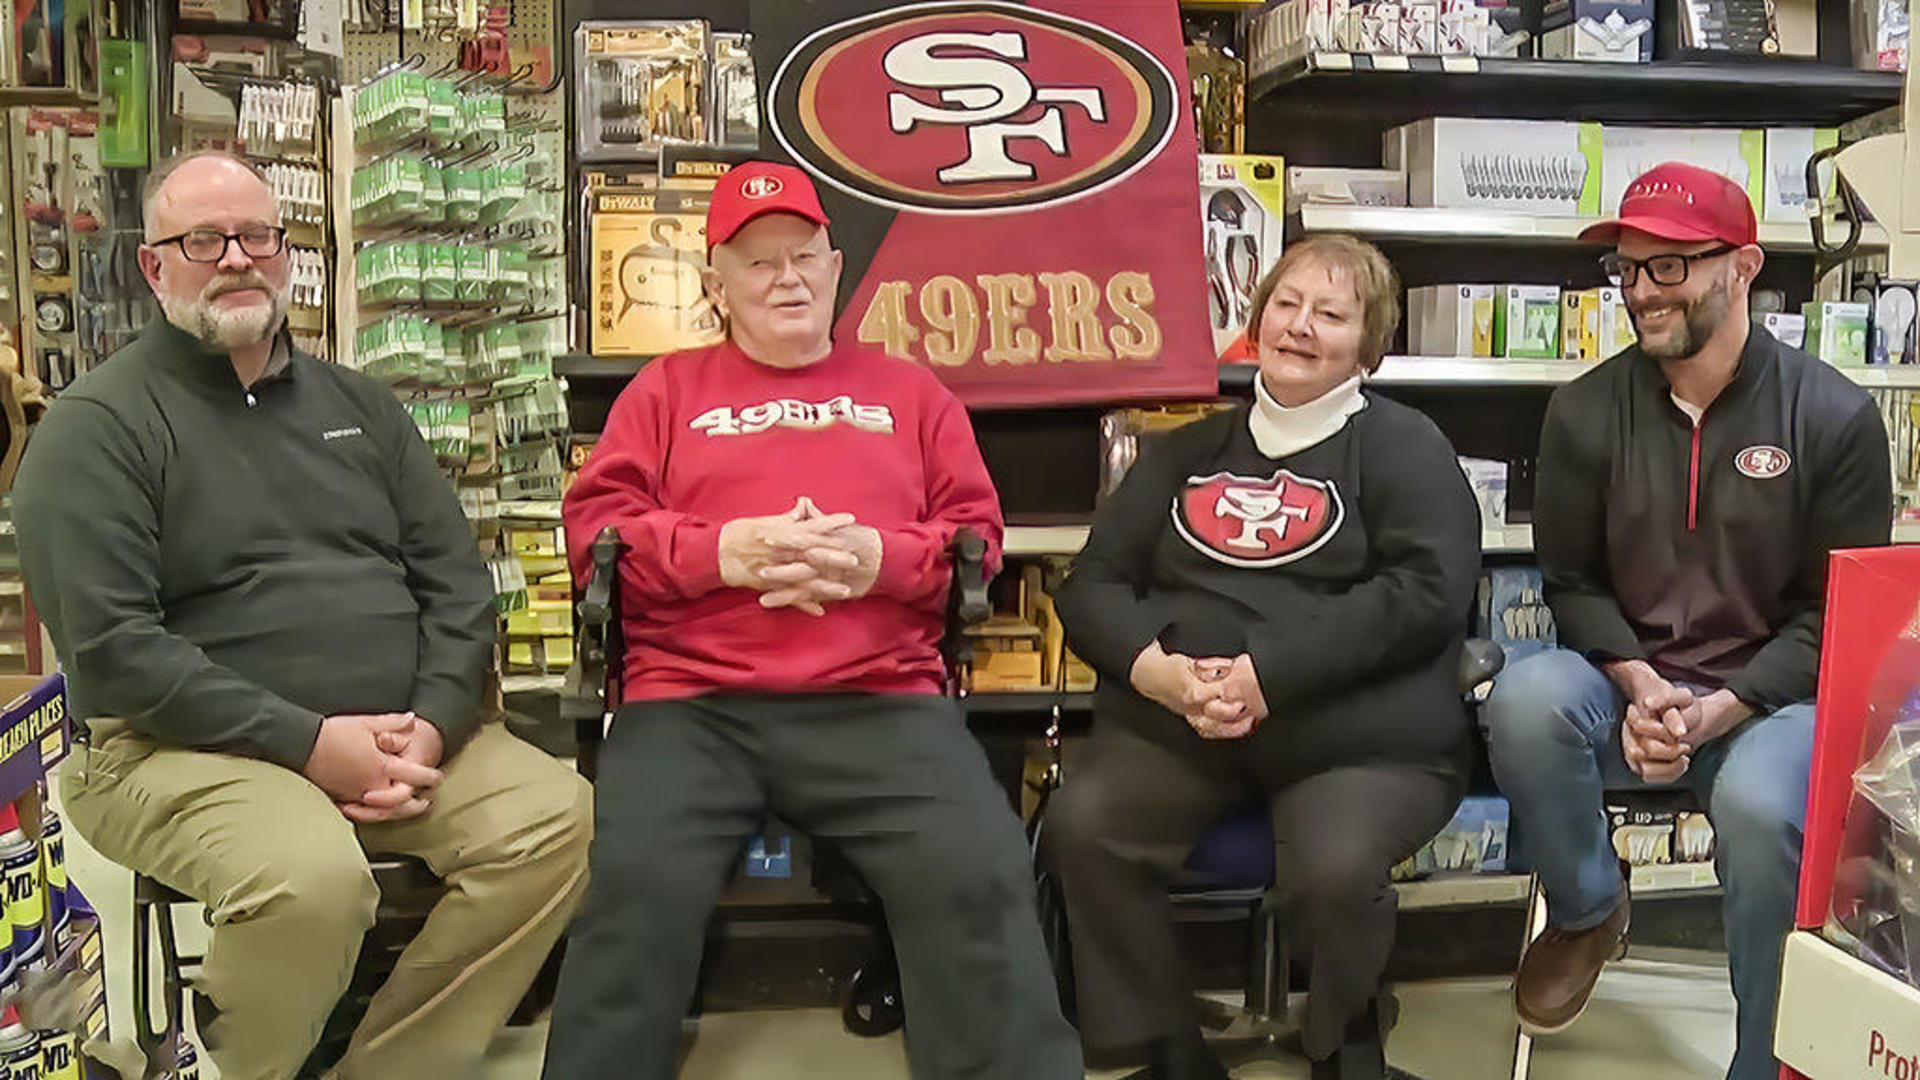 In heart of Eagles country, family of 49ers Mike McGlinchey root for S.F. -  CBS San Francisco